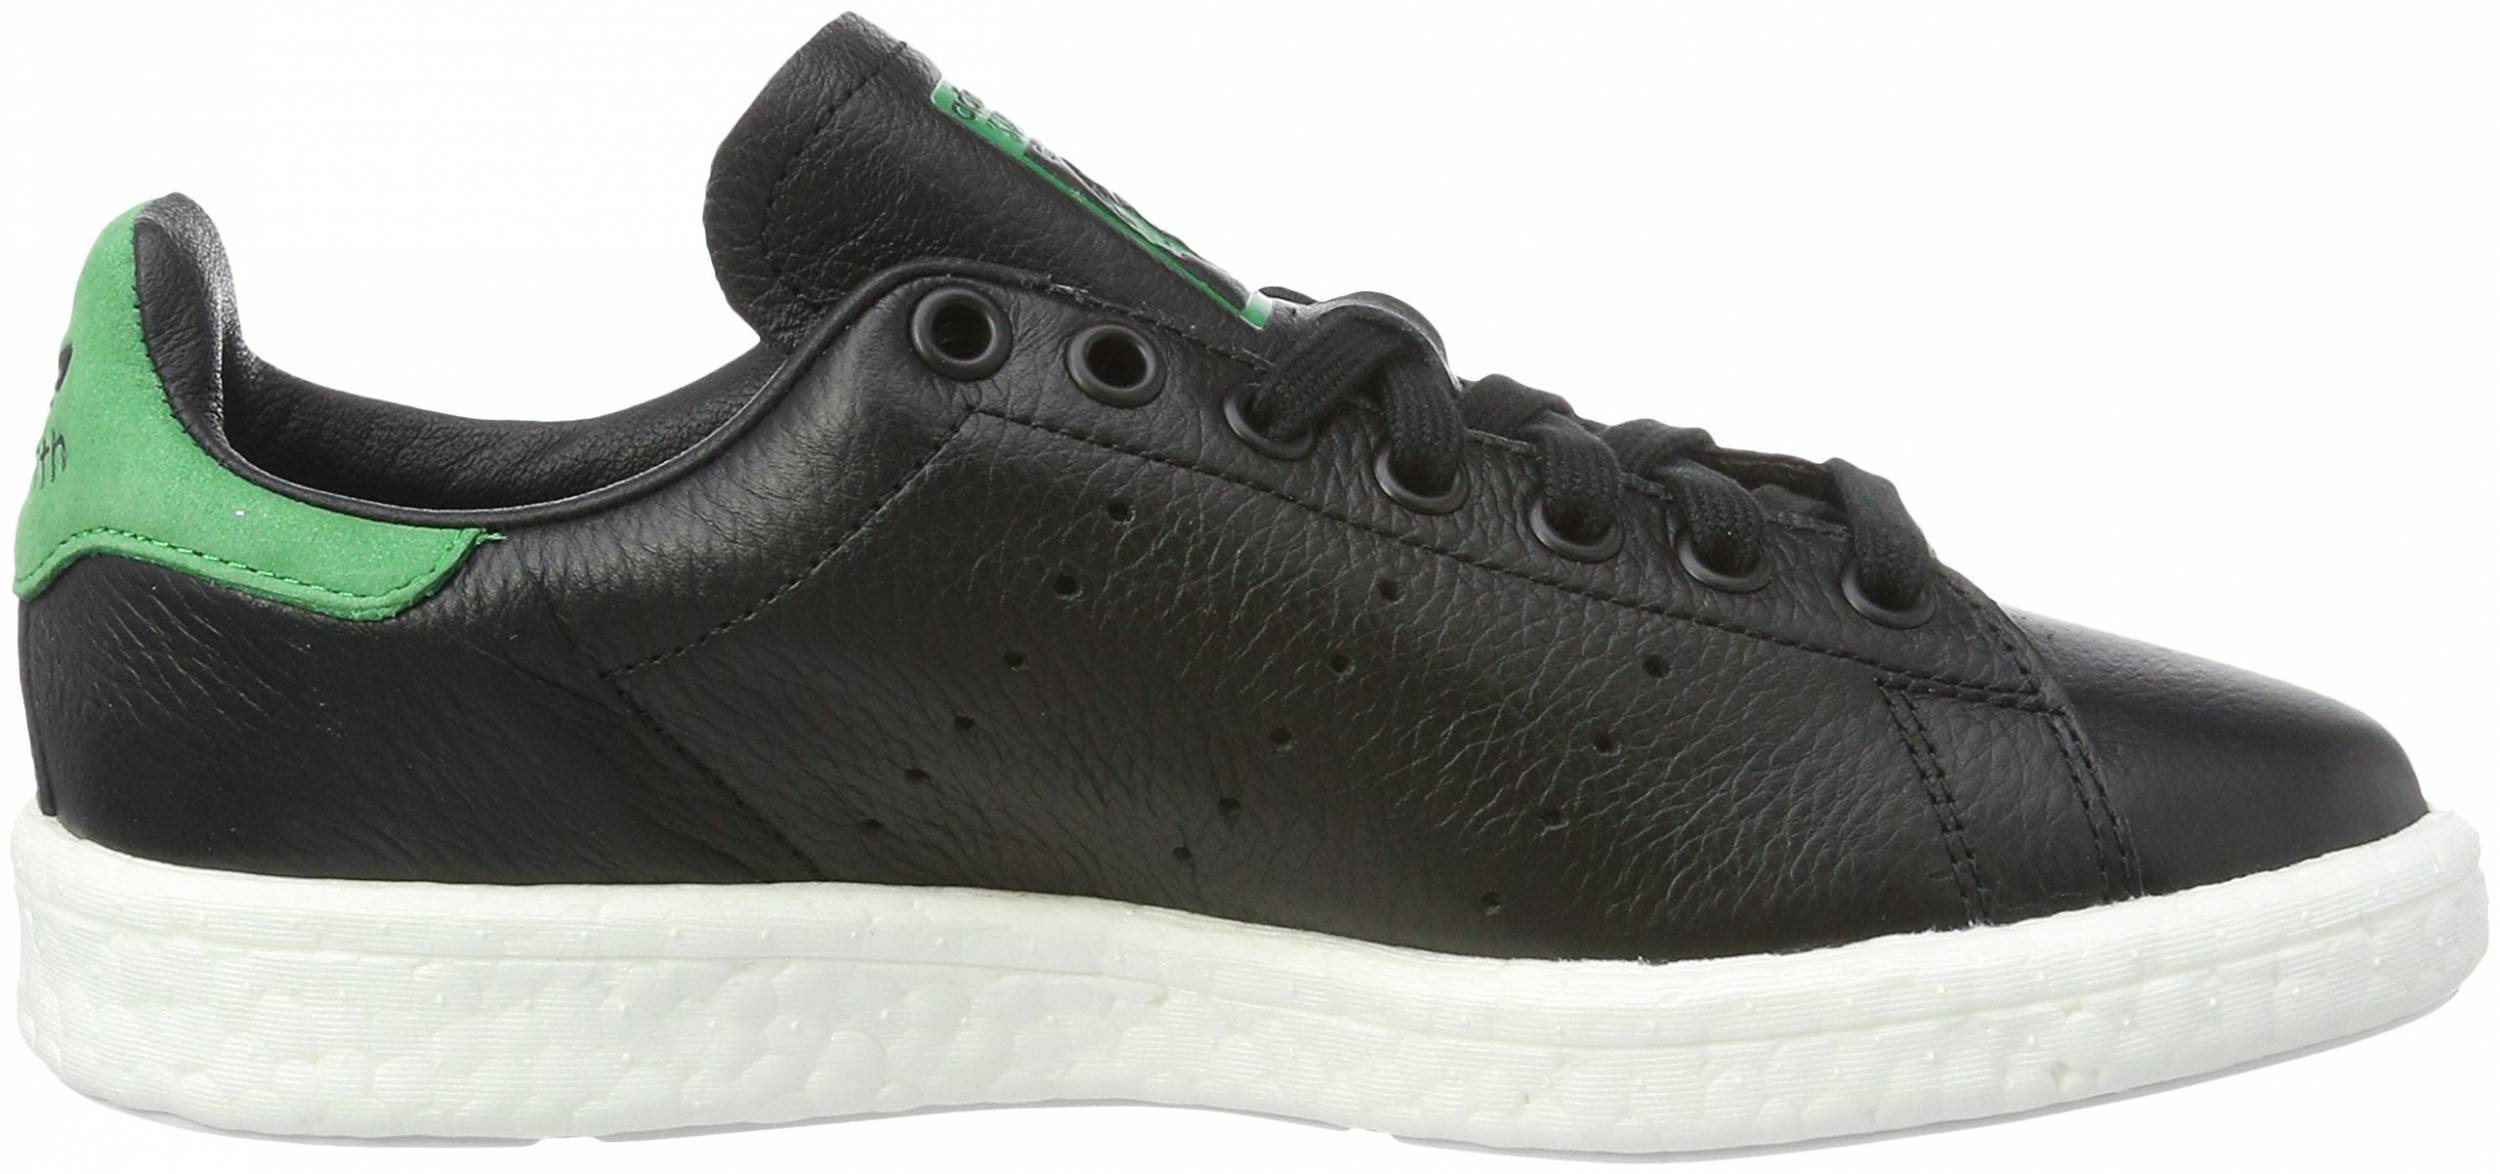 Adidas Stan Smith Boost sneakers in white black (only £60 ...